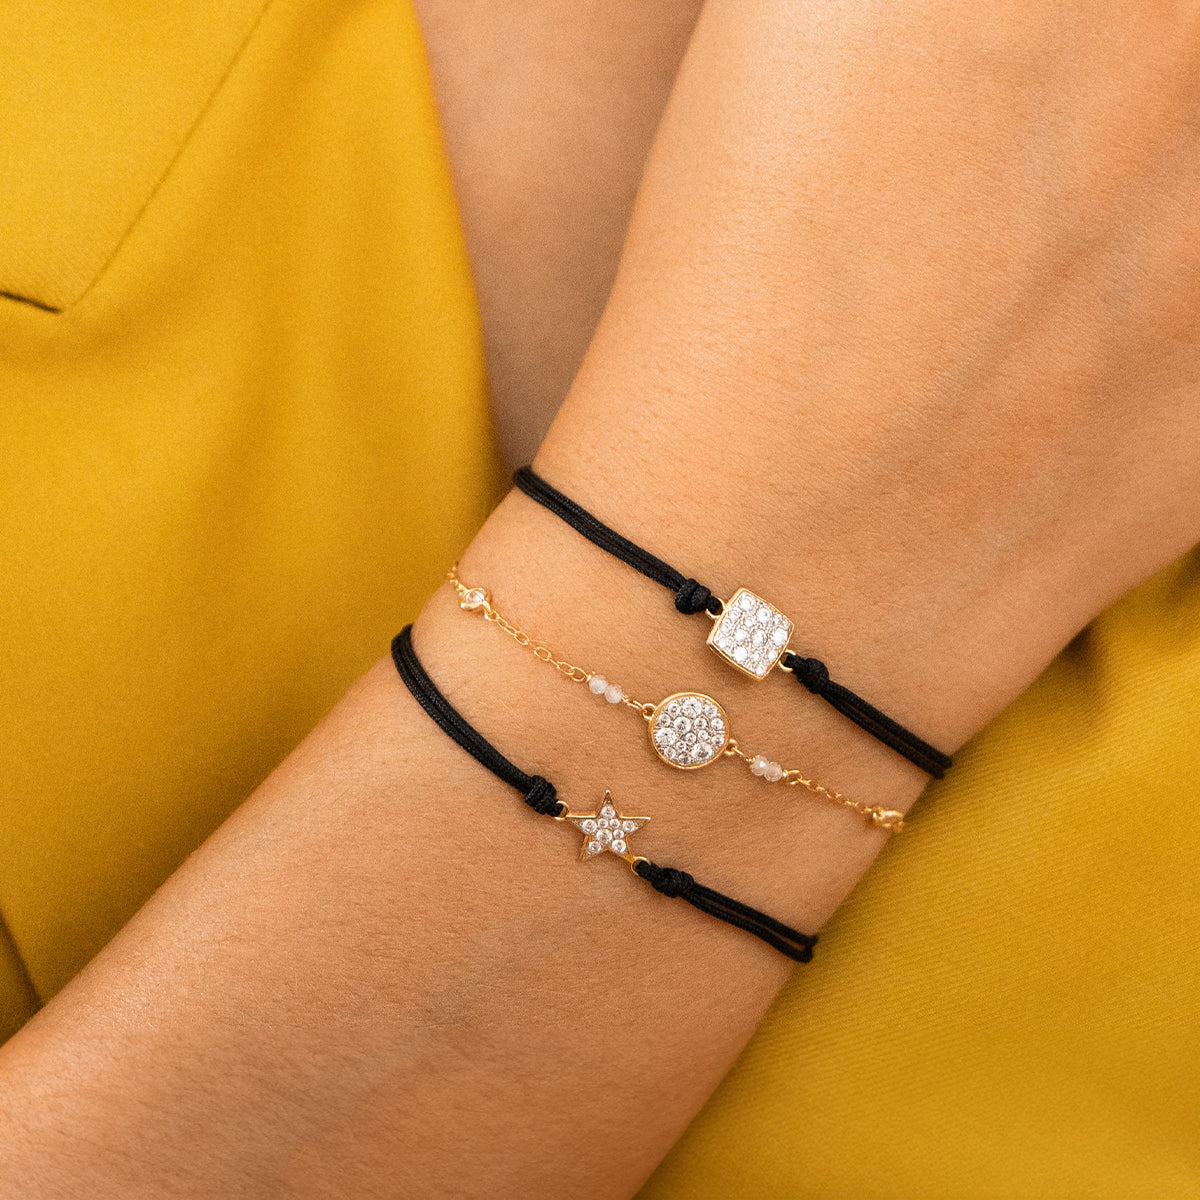 Bracelets - Bracelet with fabric cord and small pavé star - STARDUST TEN - 3 | Rue des Mille